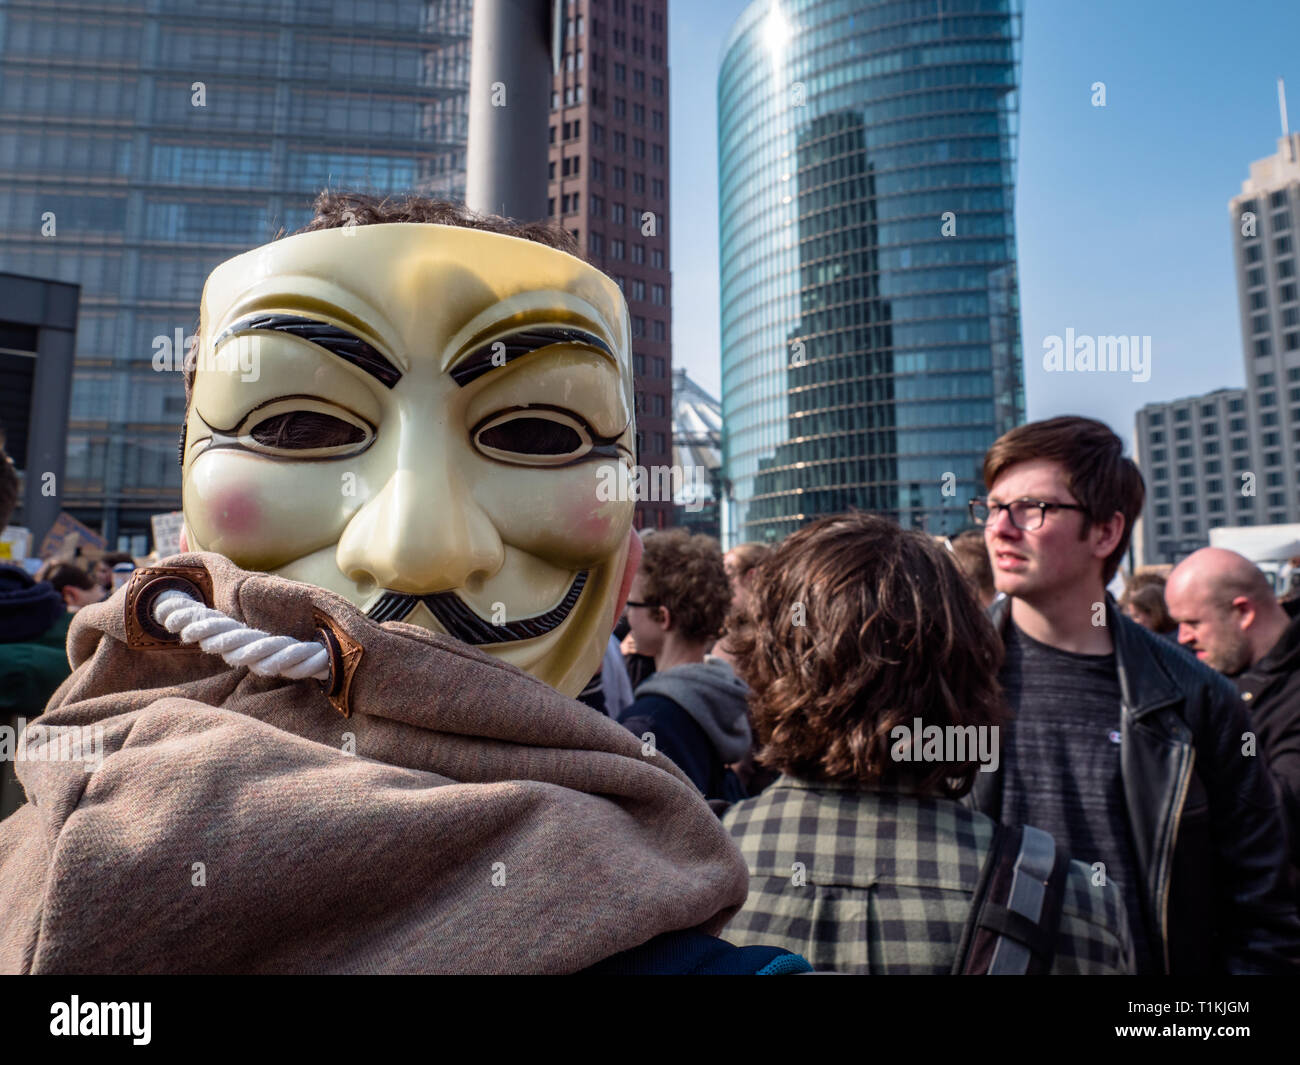 Berlin, Germany - March 23, 2019: Demonstration against EU Internet copyright reform / article 11 and article 13 in Berlin Germany Stock Photo